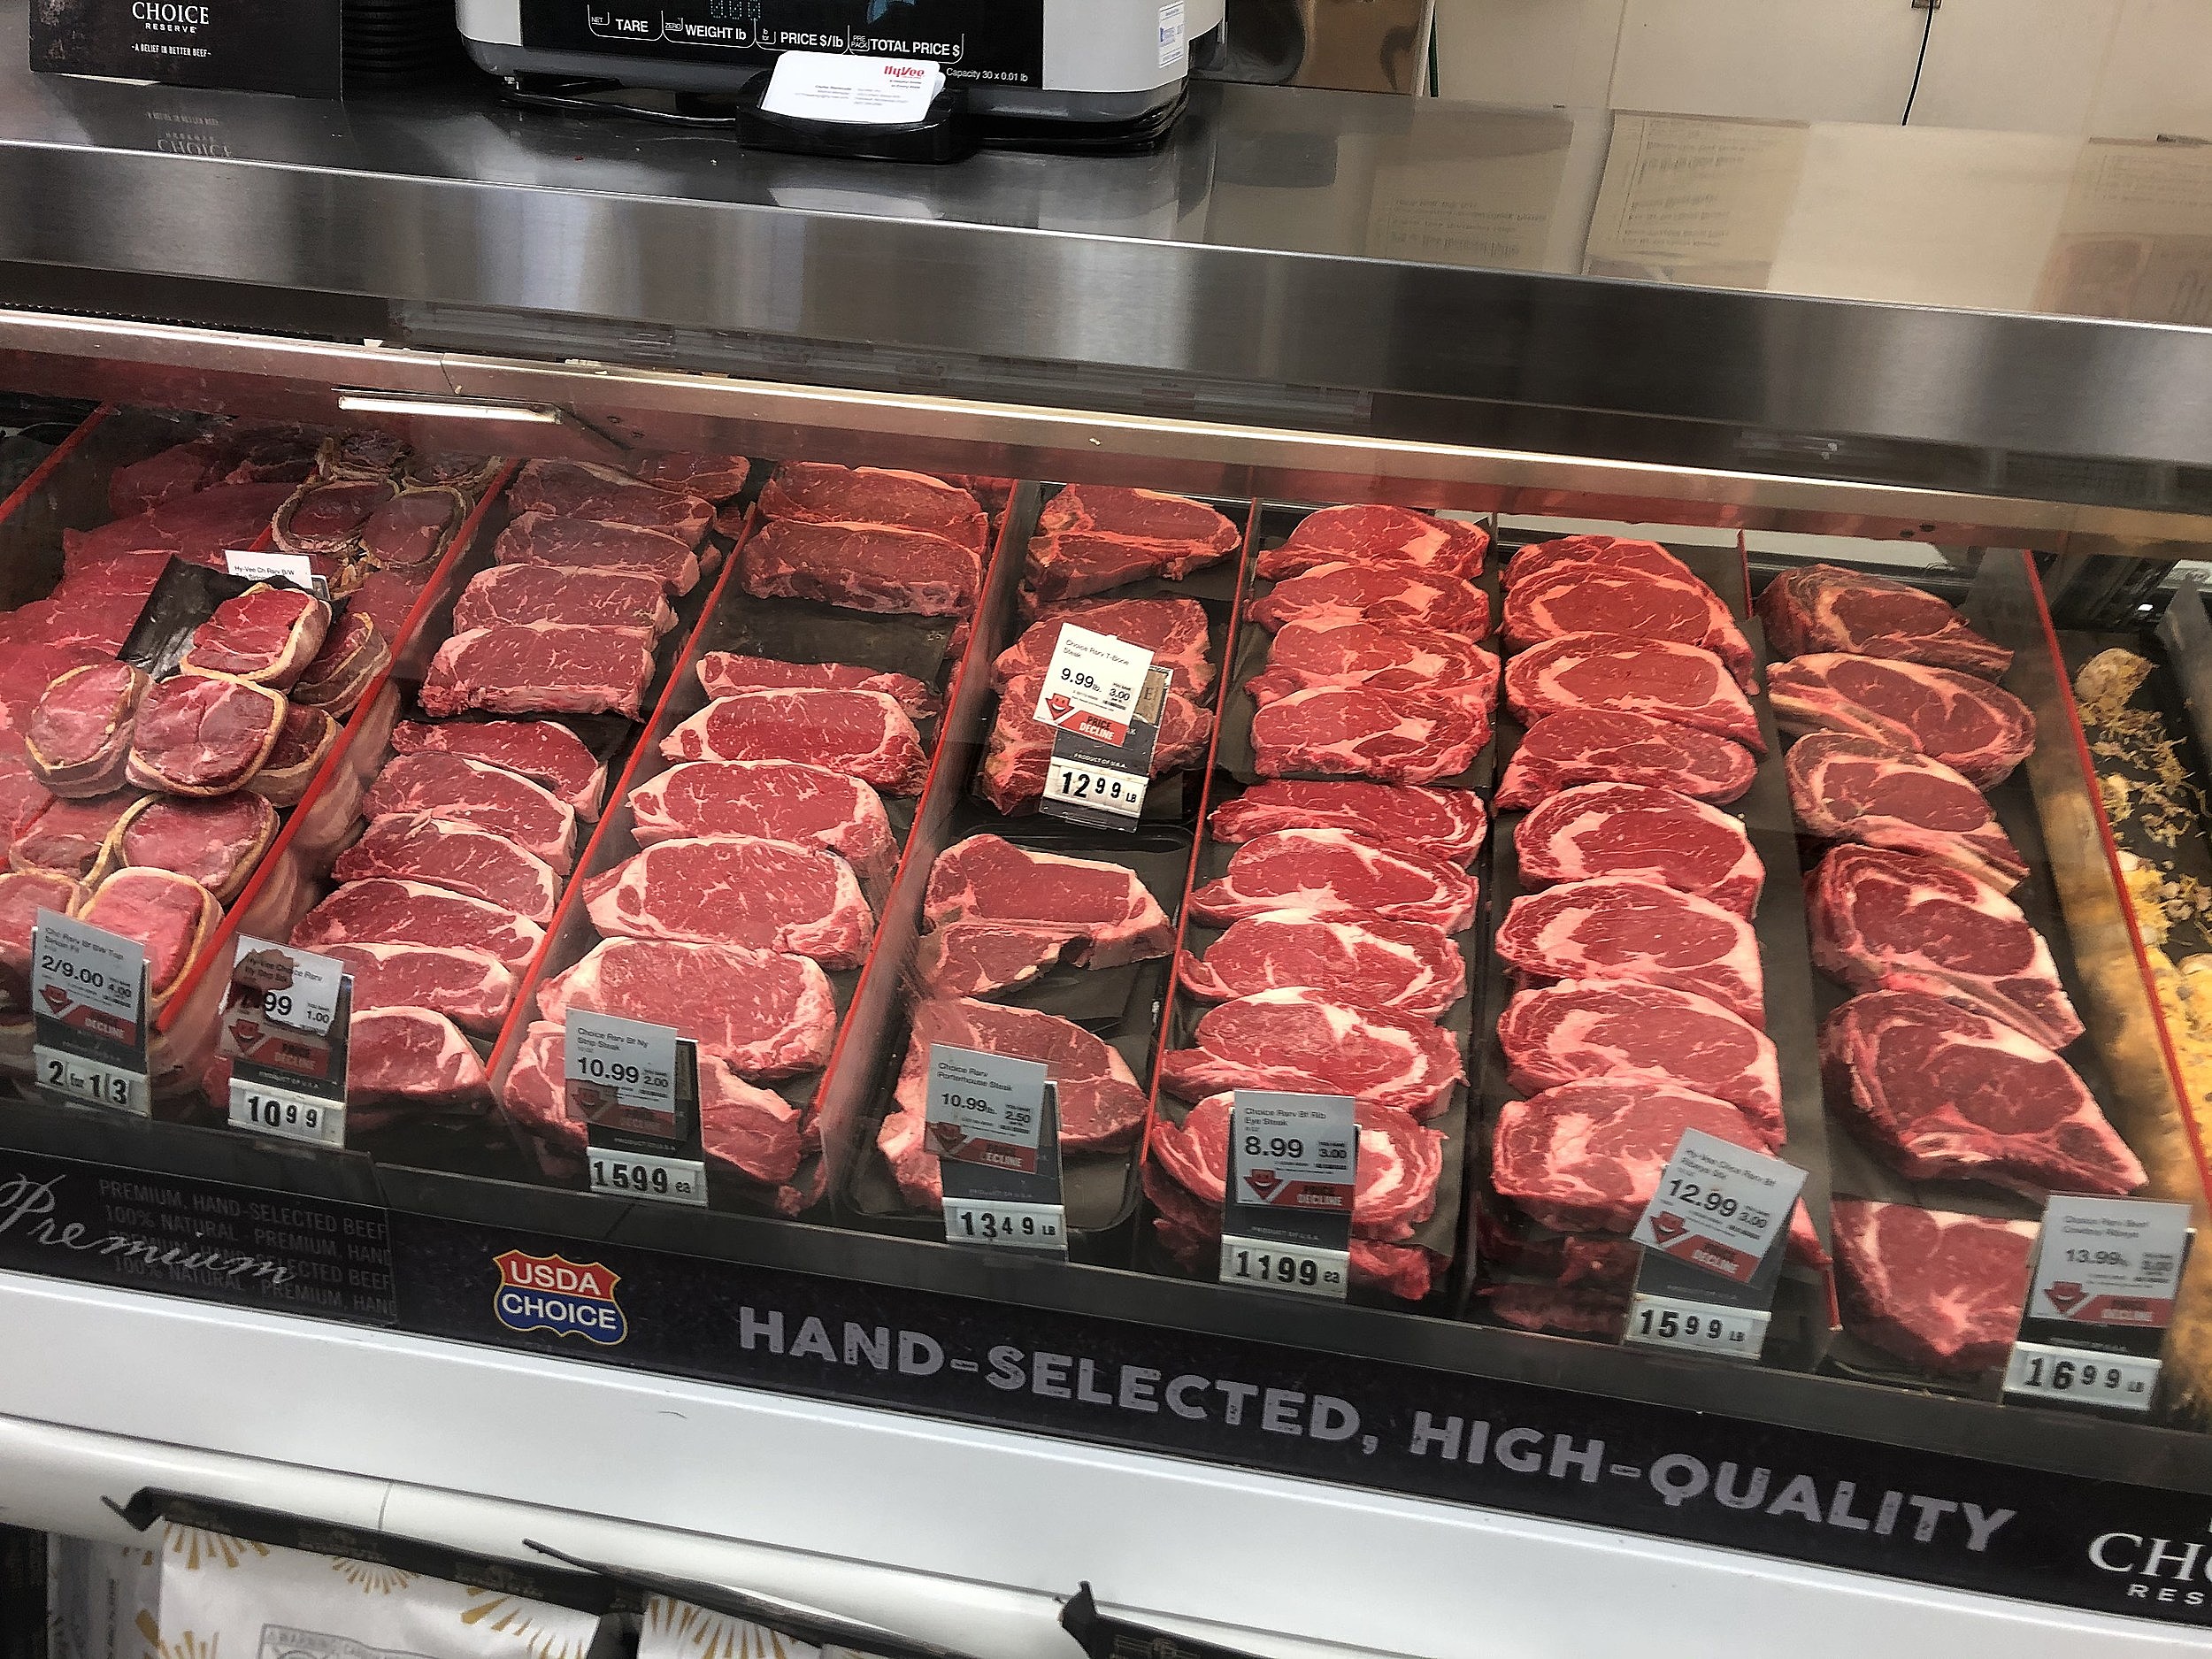 https://townsquare.media/site/684/files/2020/03/HYVEE-MEAT-ONE.jpg